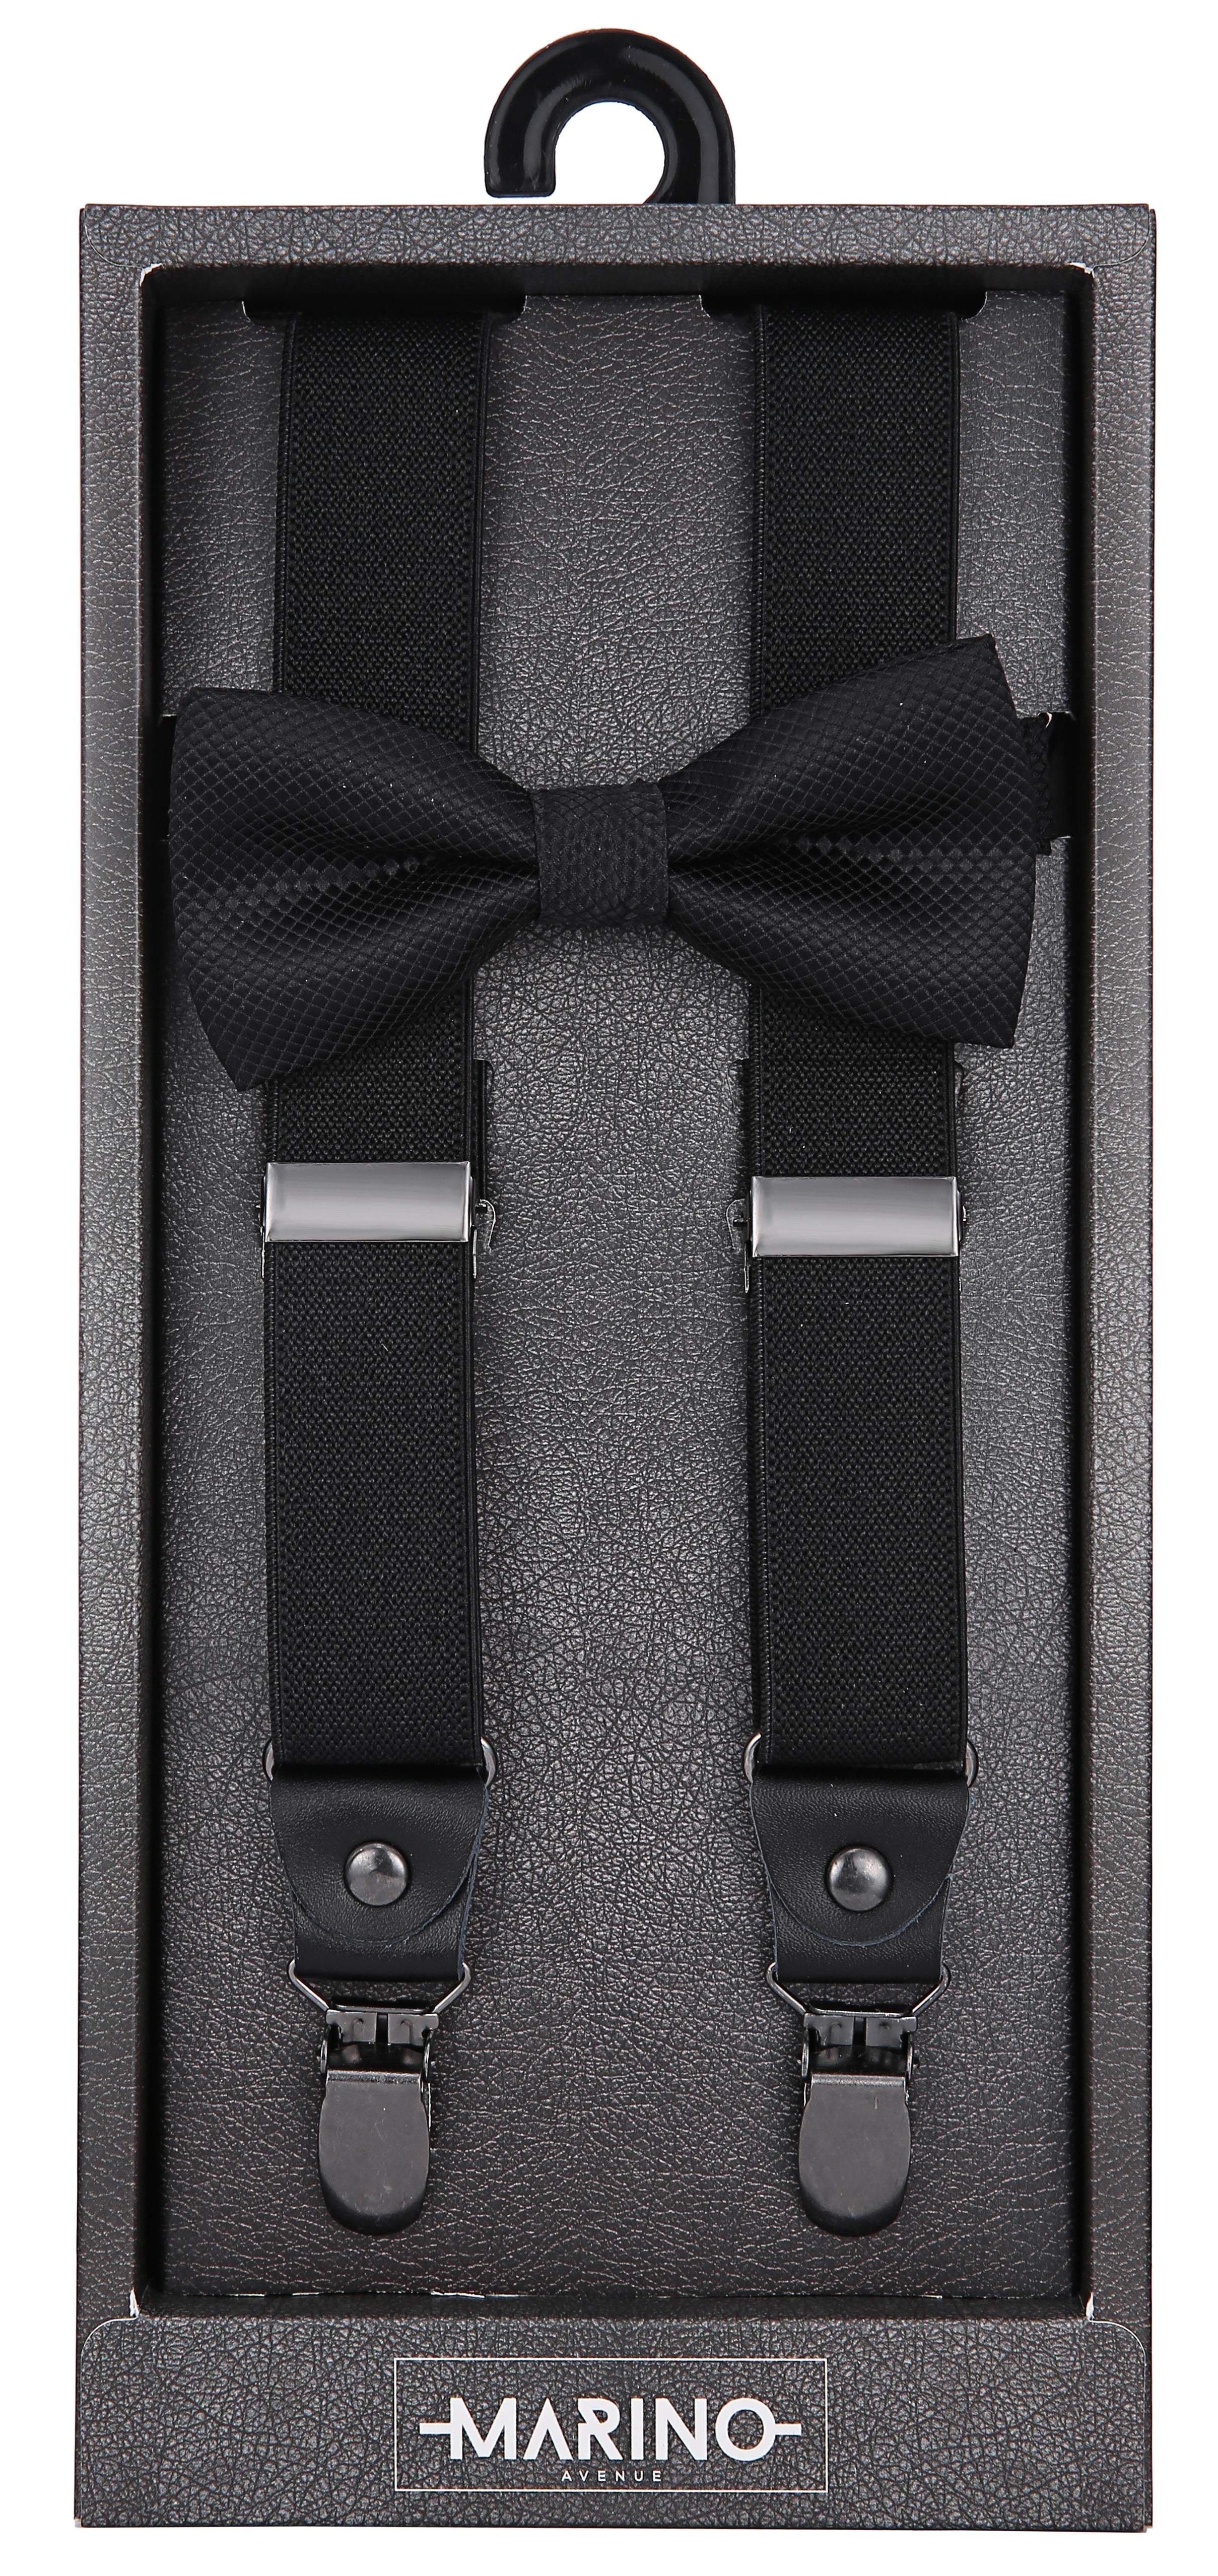 Marino Elastic Fashion Suspenders 1 Wide with Genuine Leather Tips and Polyester Bow Tie Set for Men and Teens